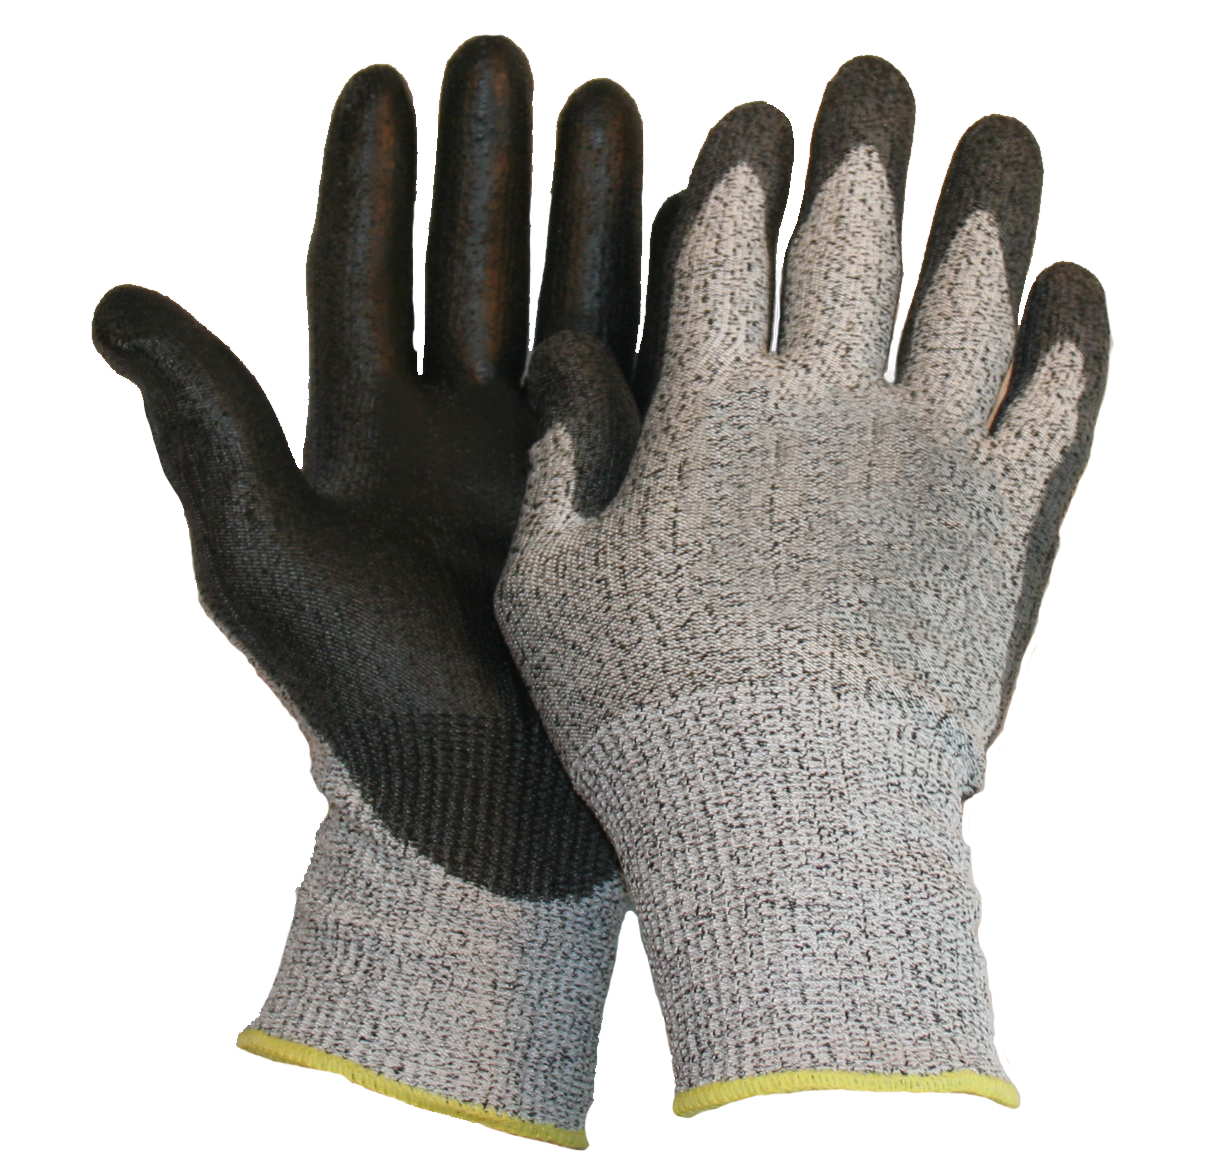 http://www.freezerwear.com/Shared/Images/Product/780S-780XL-13-Guage-Cut-Resistant-Glove-Pair/SAMCO-780.png